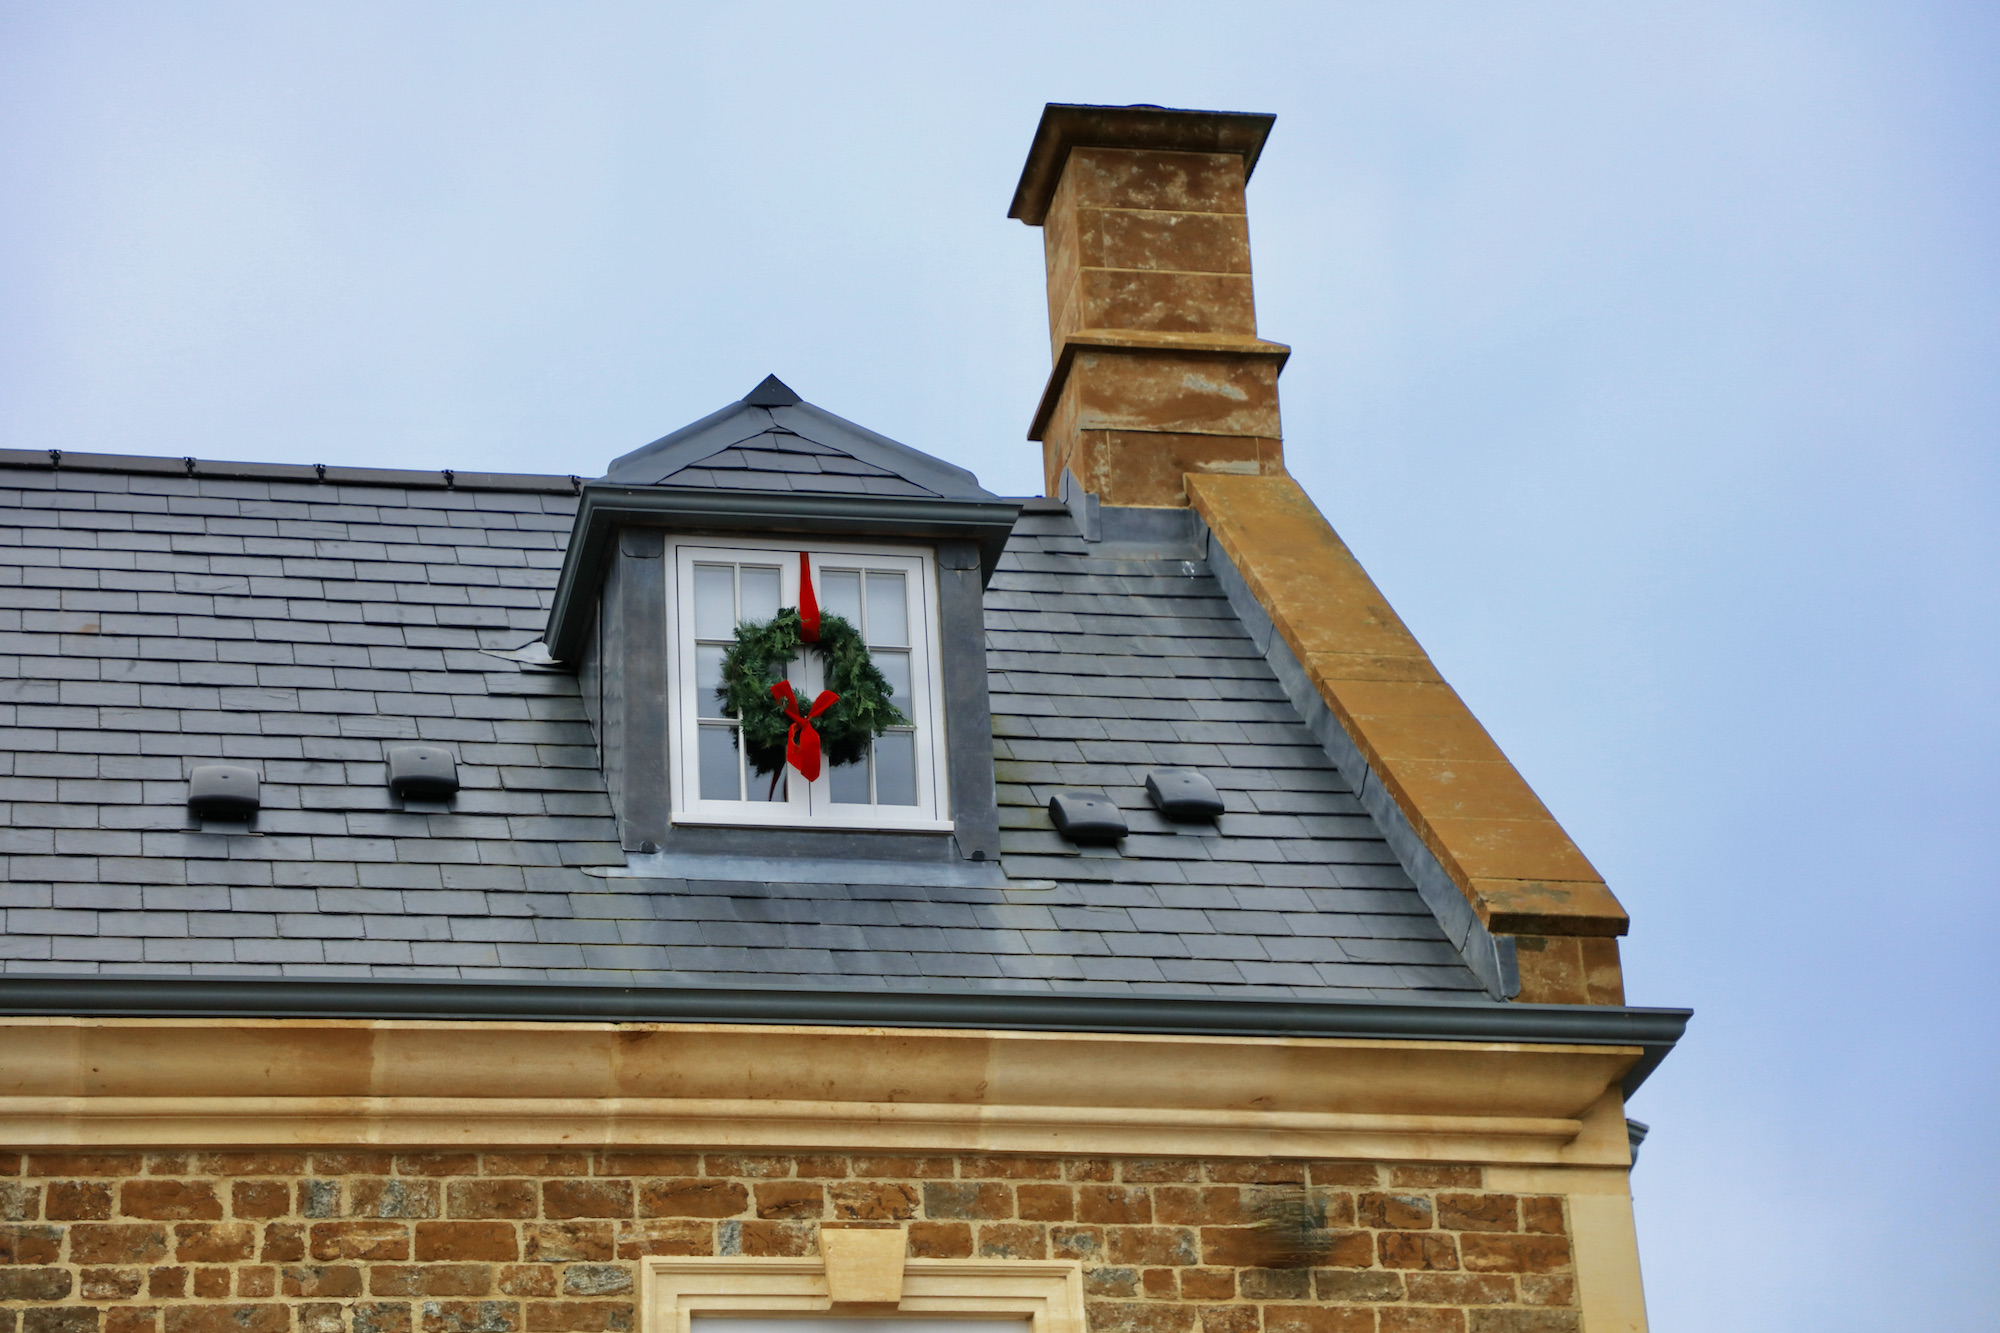 Rooftop window with conifer wreath and velvet red bows